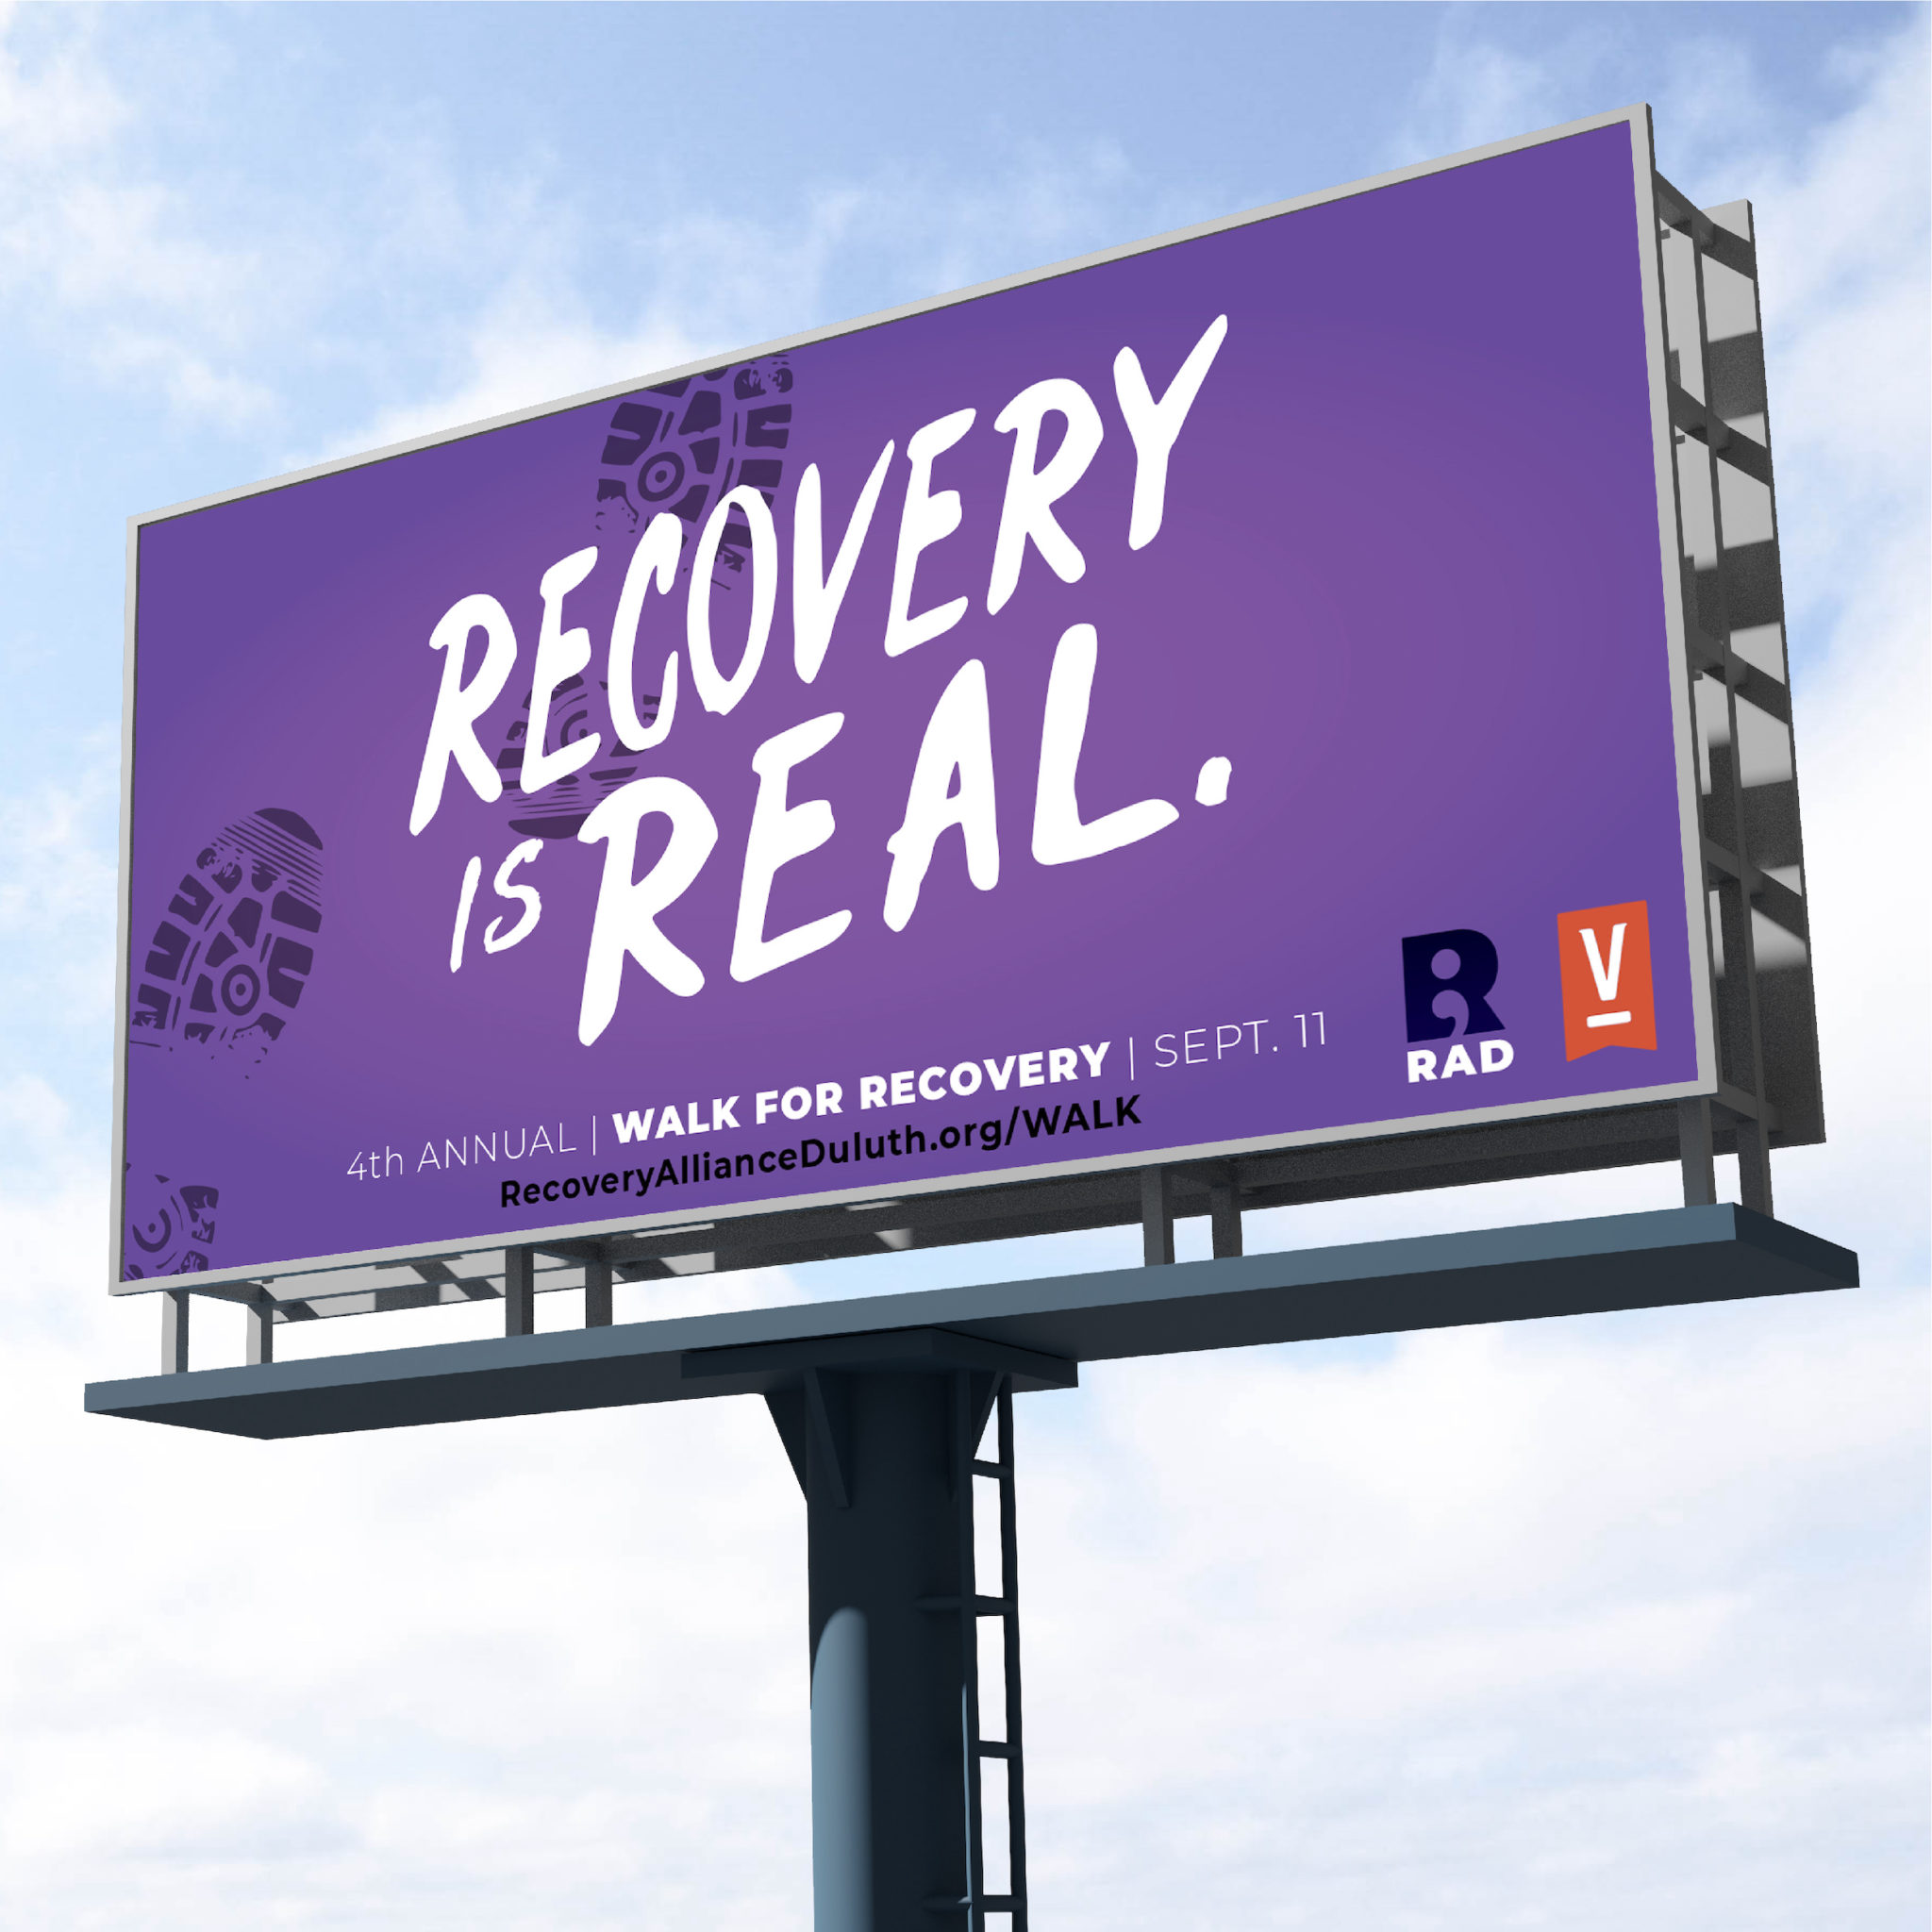 Recovery Alliance Duluth national recovery month billboard designed by Šek Design Studio